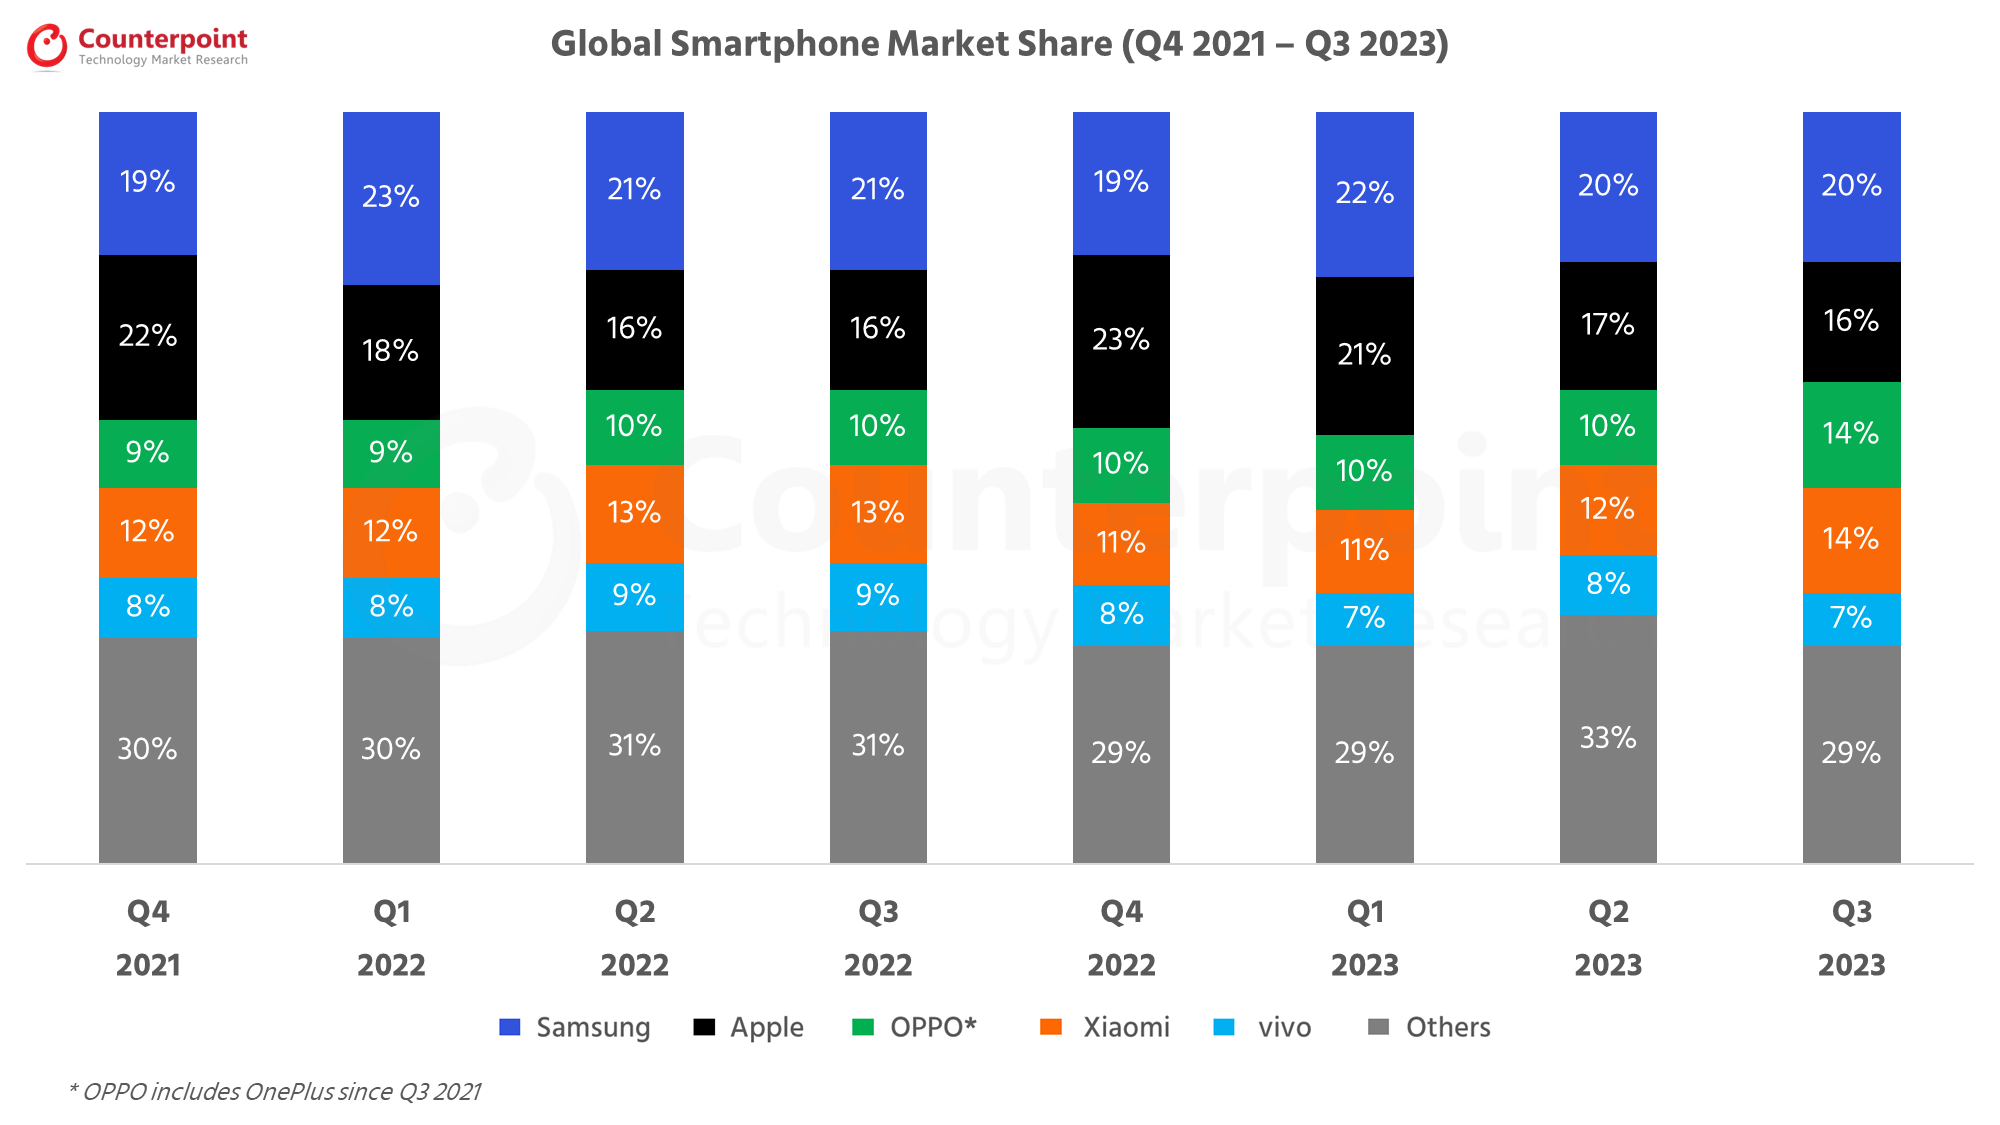 Counterpoint Research Global Smartphone Market Share Q3 2023